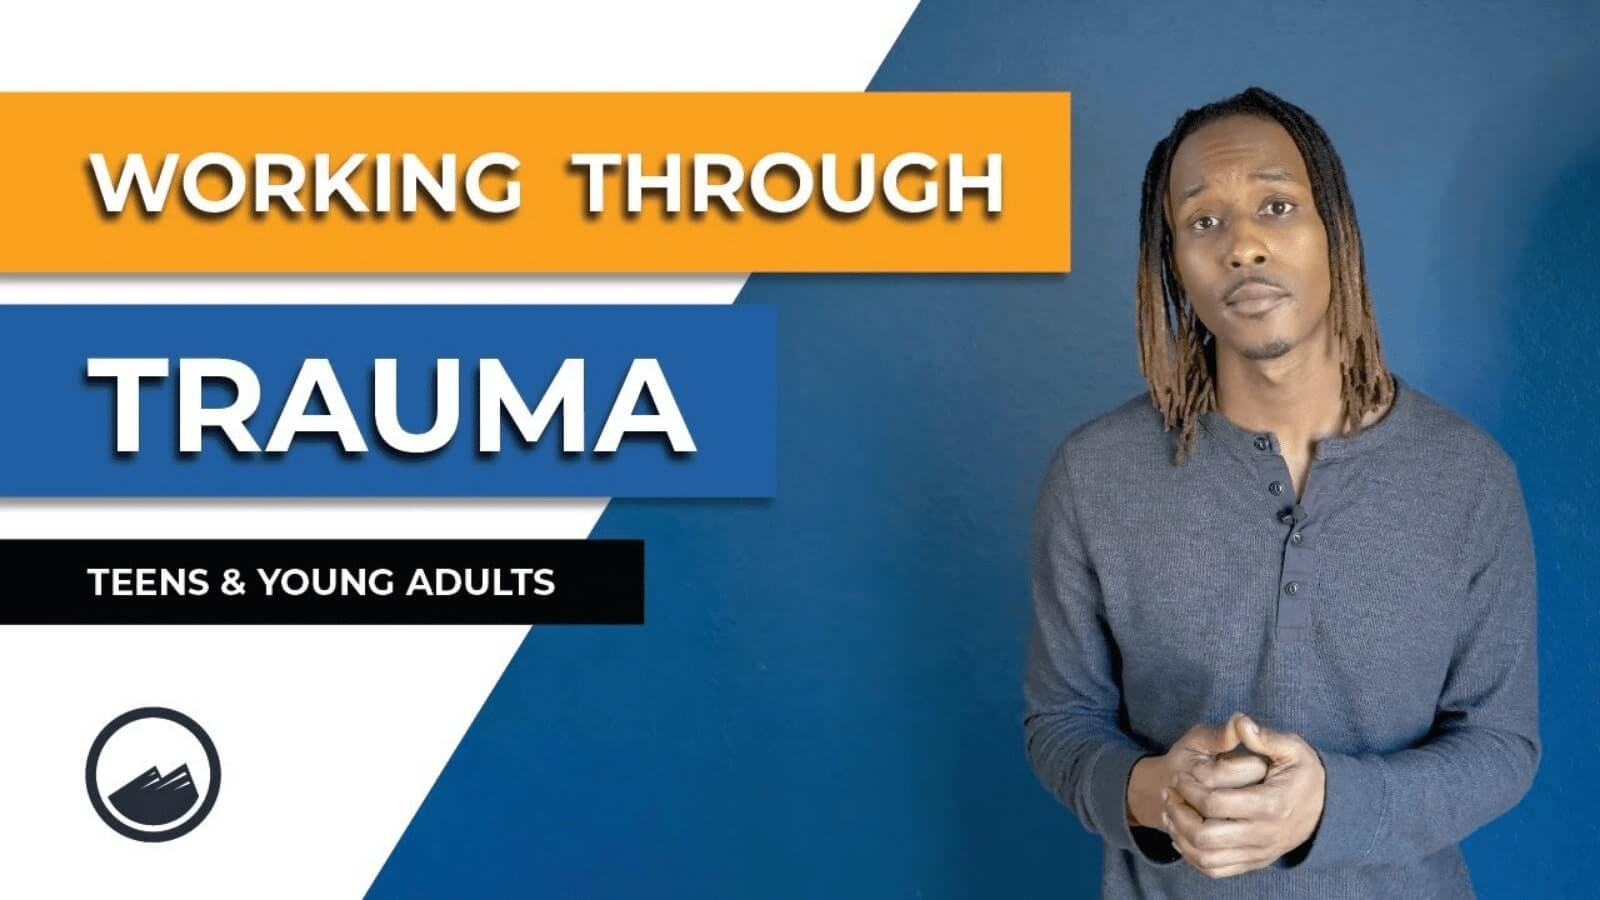 Working through trauma for teens and young adults